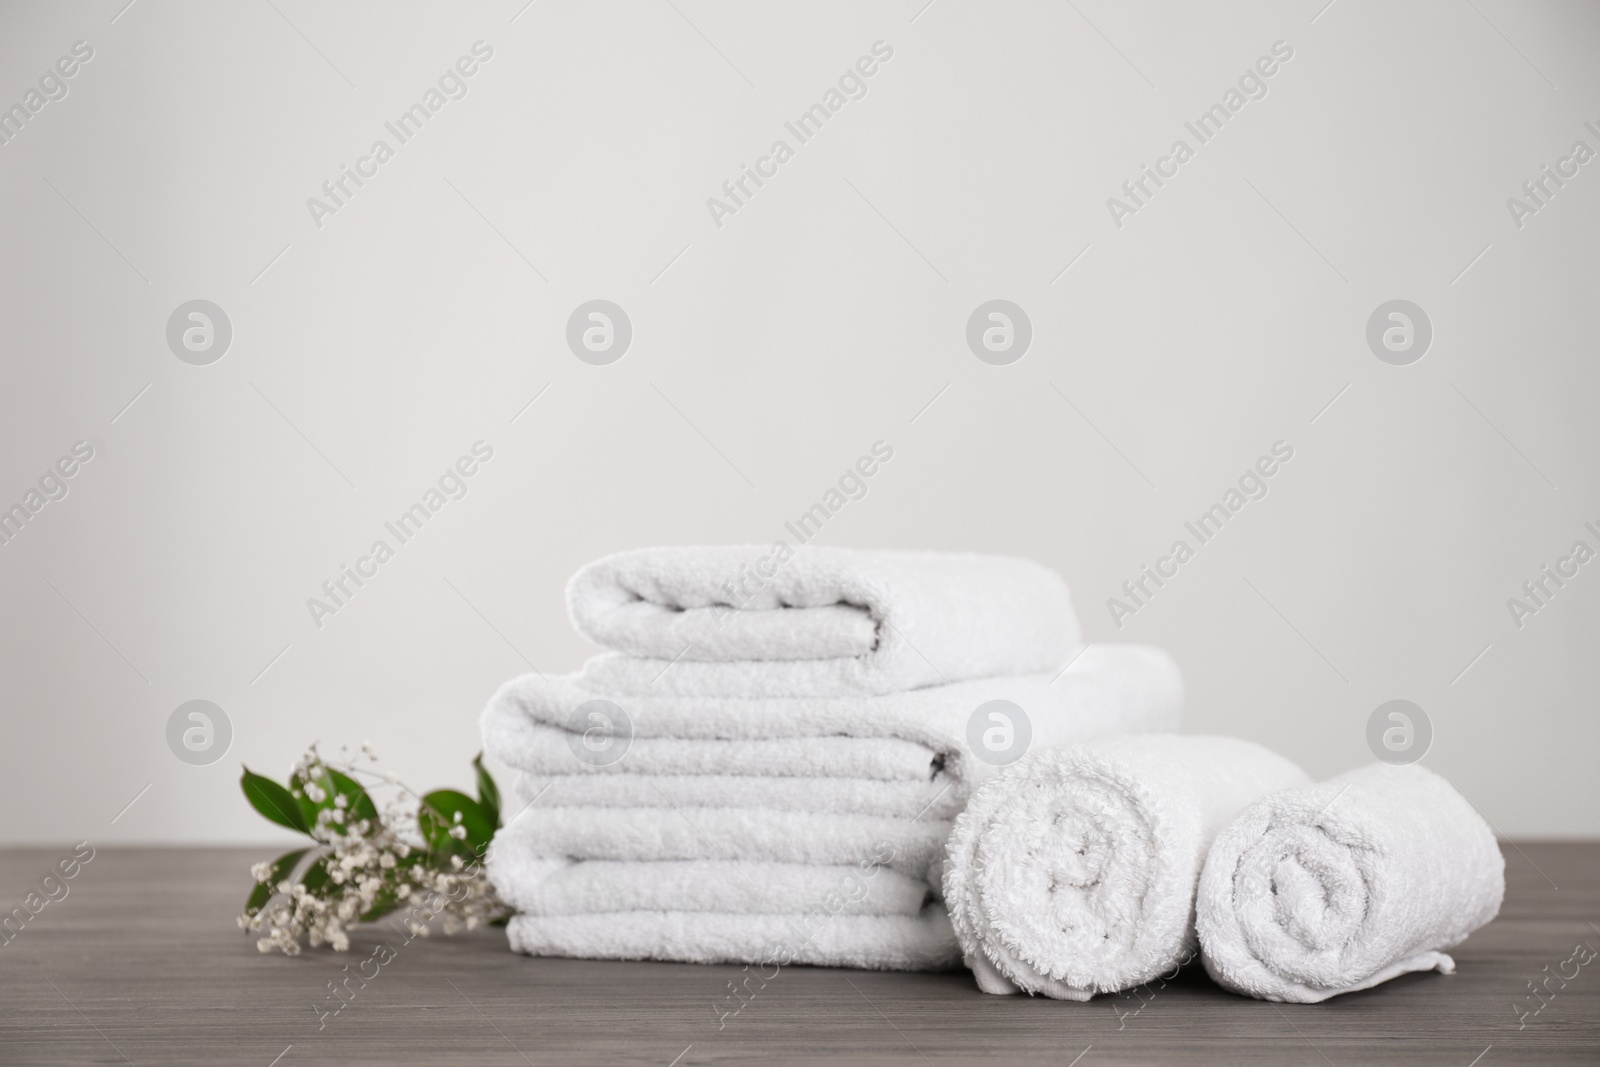 Photo of Fresh white towels and green plant on grey wooden table